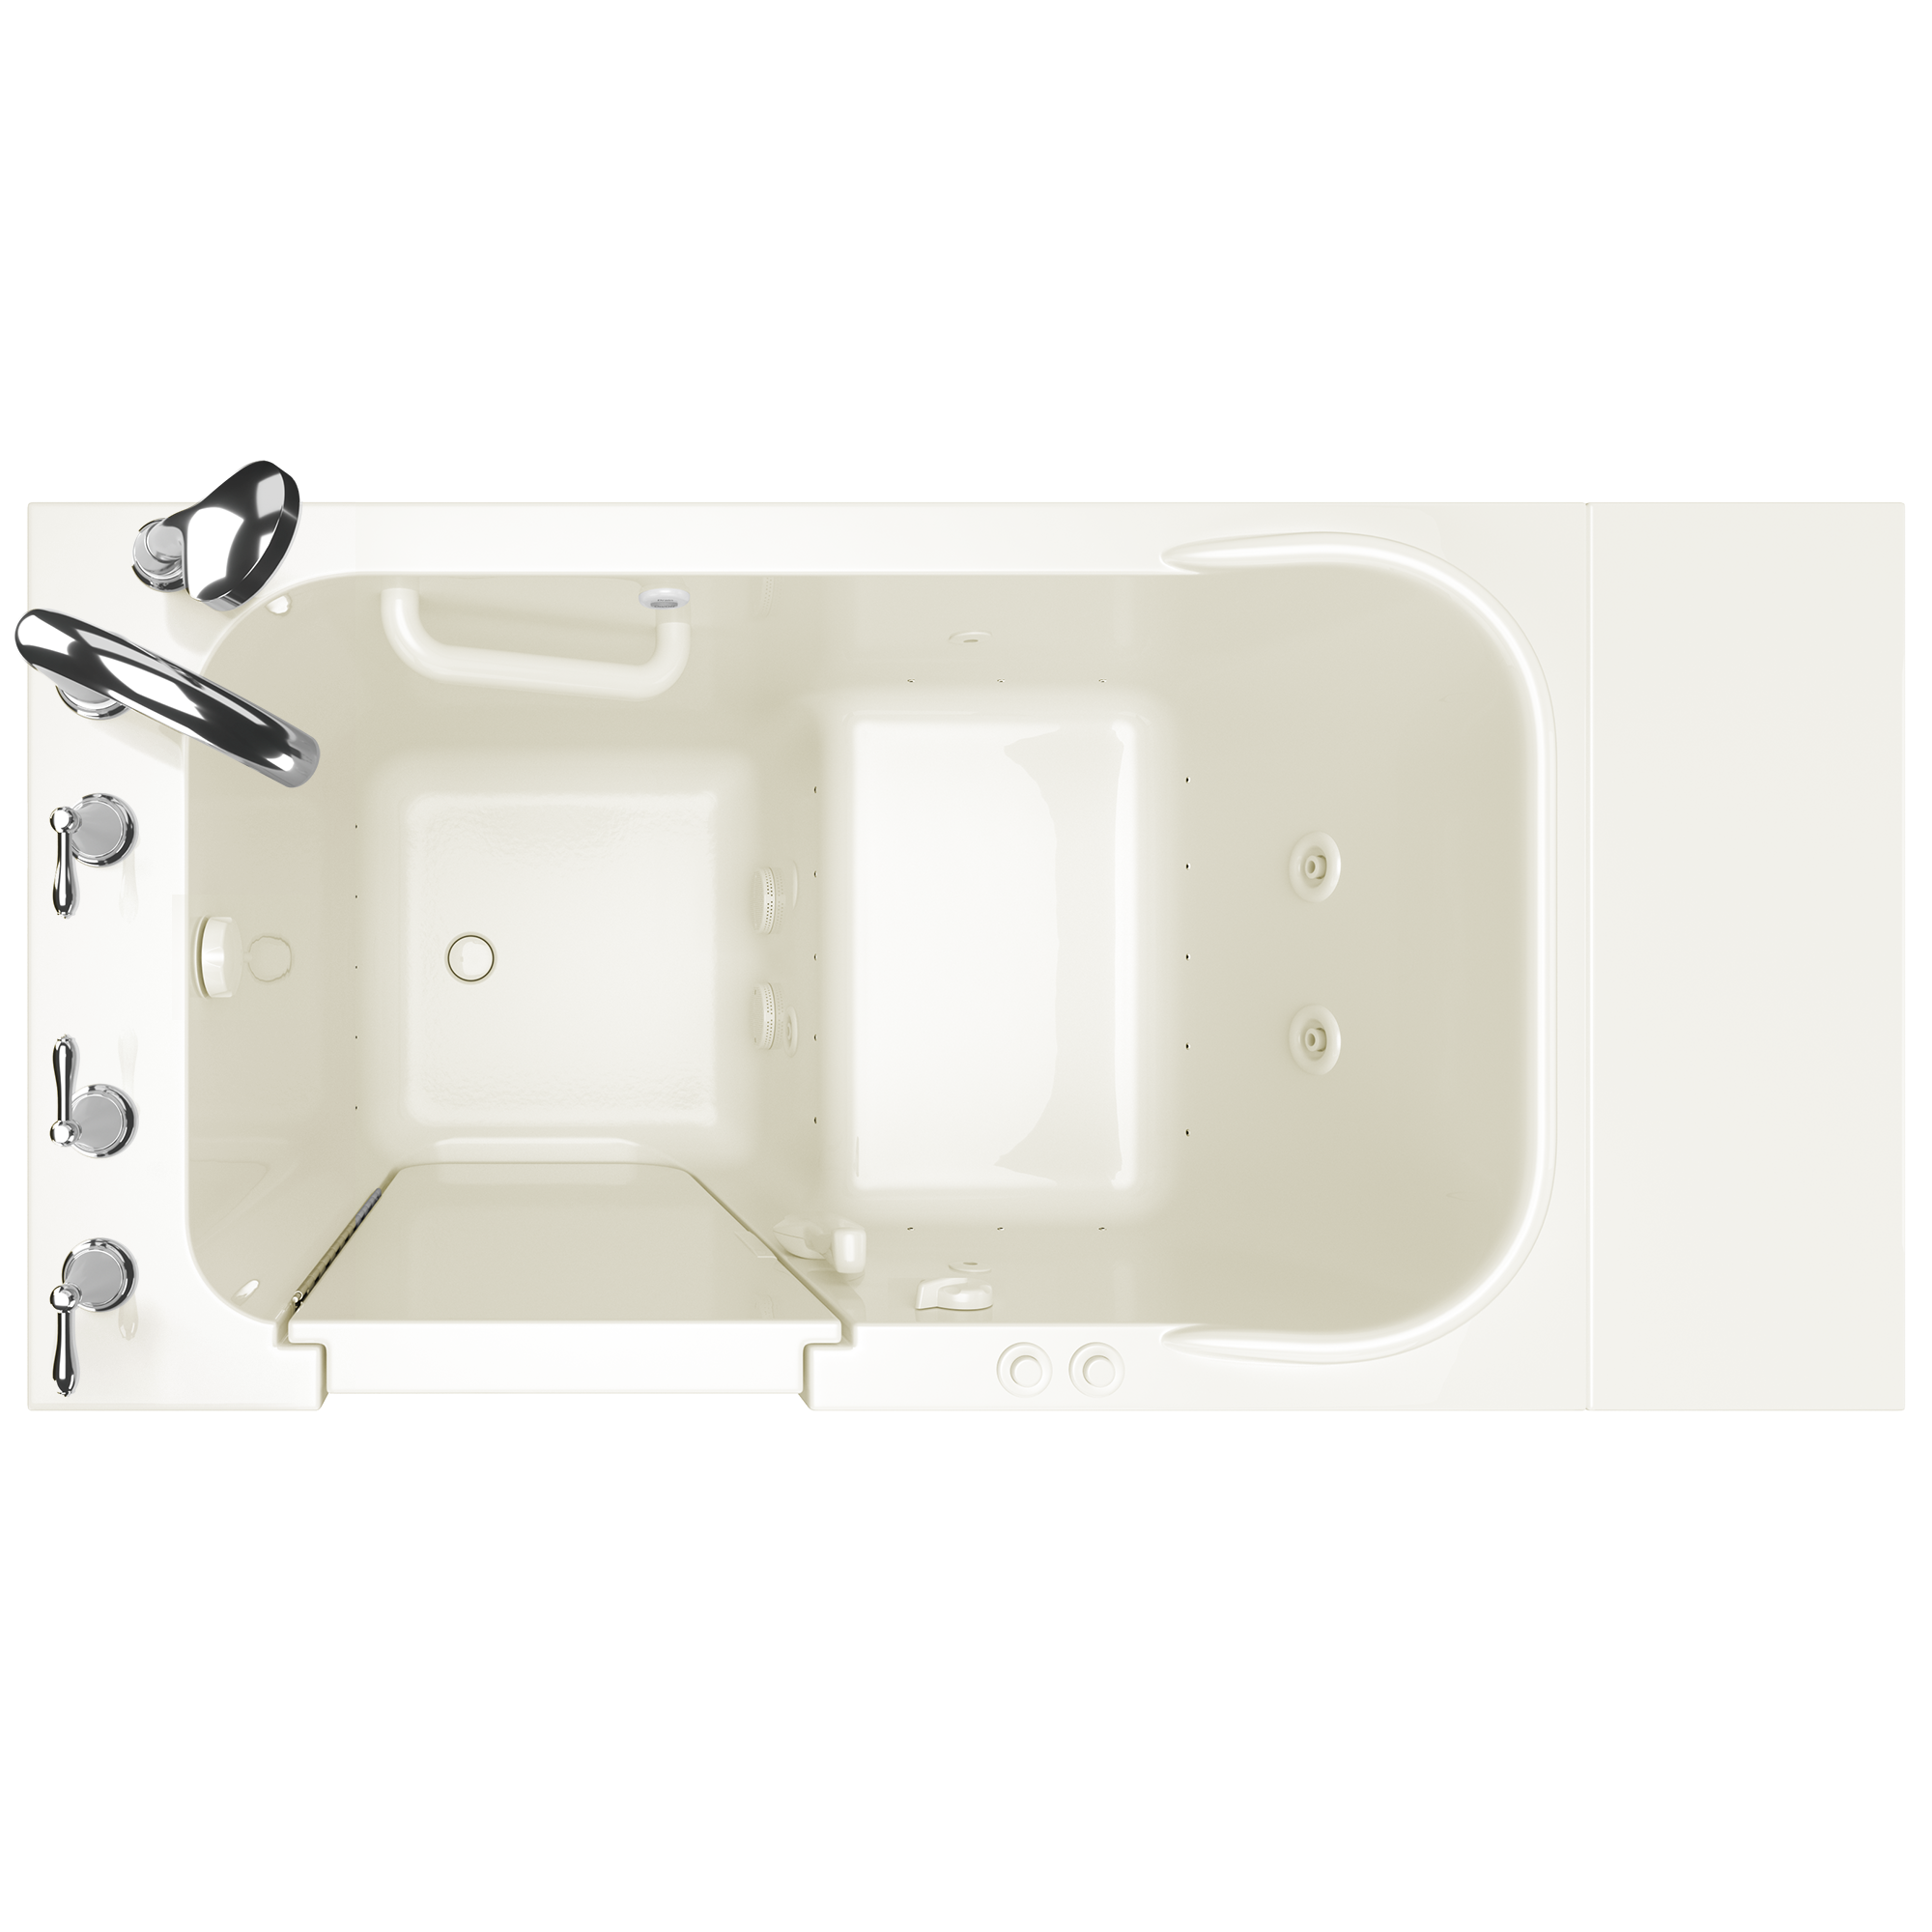 Gelcoat Value Series 28 x 48-Inch Walk-in Tub With Combination Air Spa and Whirlpool Systems - Left-Hand Drain With Faucet